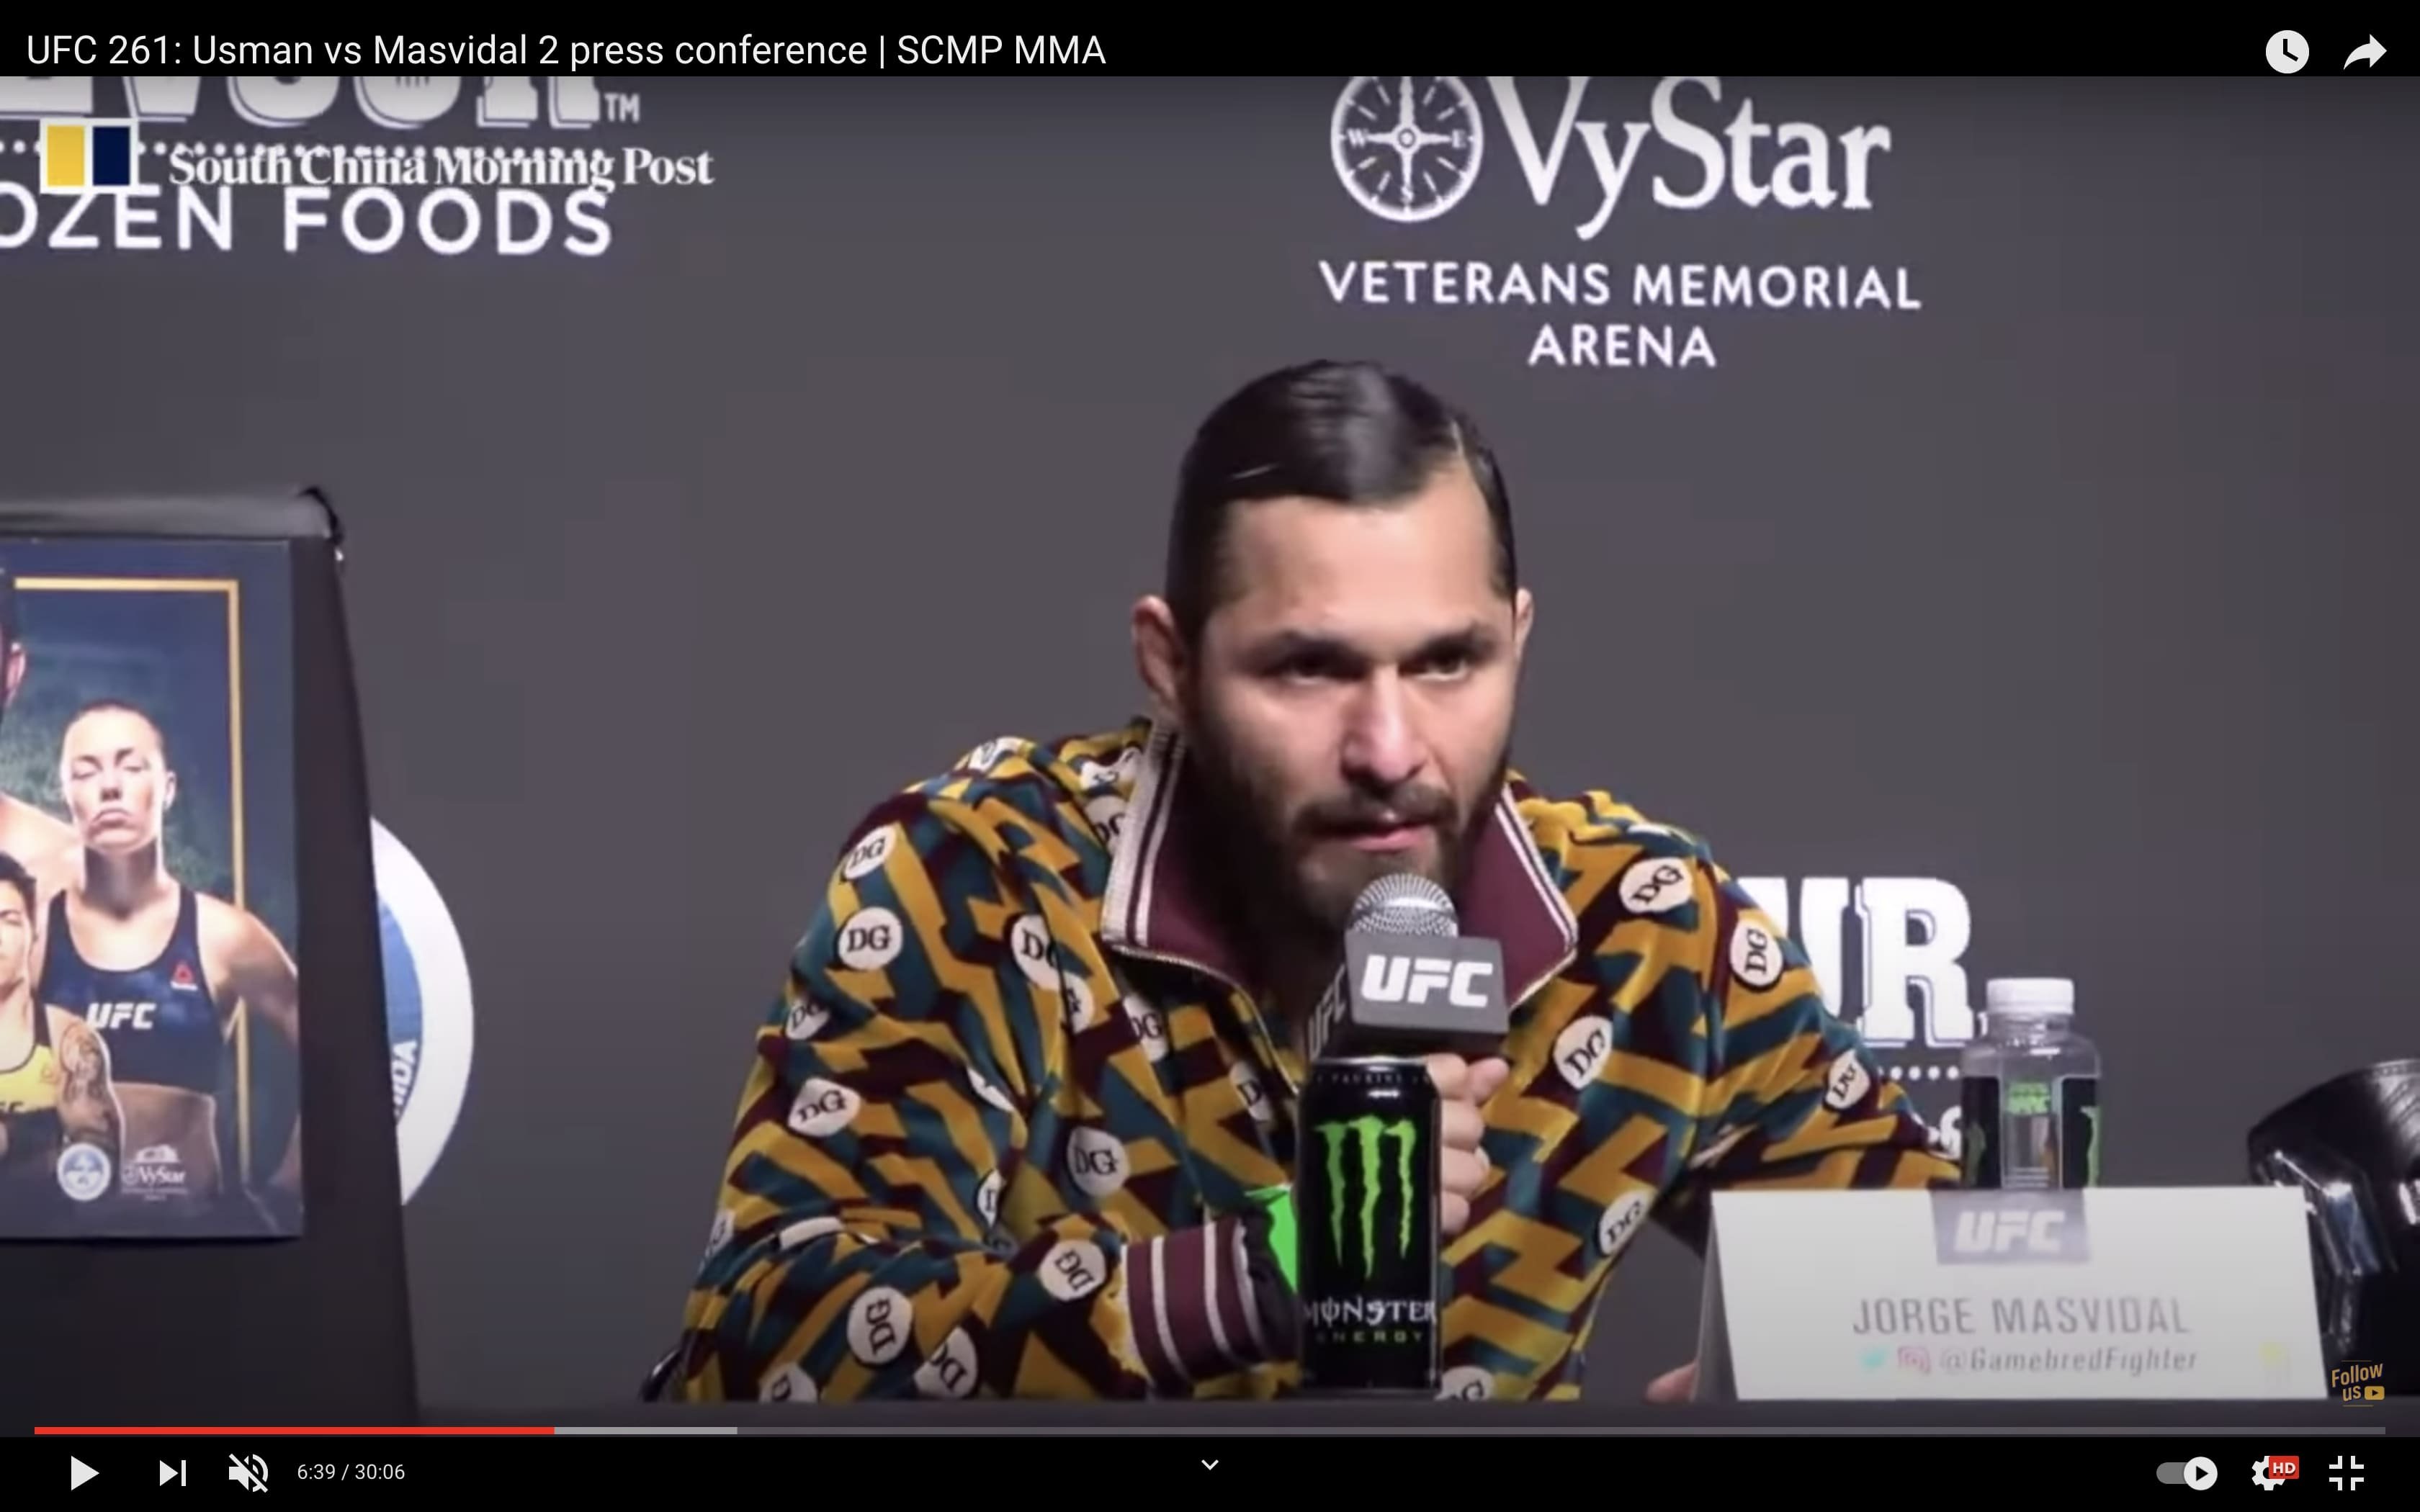 Jorge Masvidal speaks to the media at the UFC 261 press conference in Jacksonville, Florida. Photo: Drake Riggs